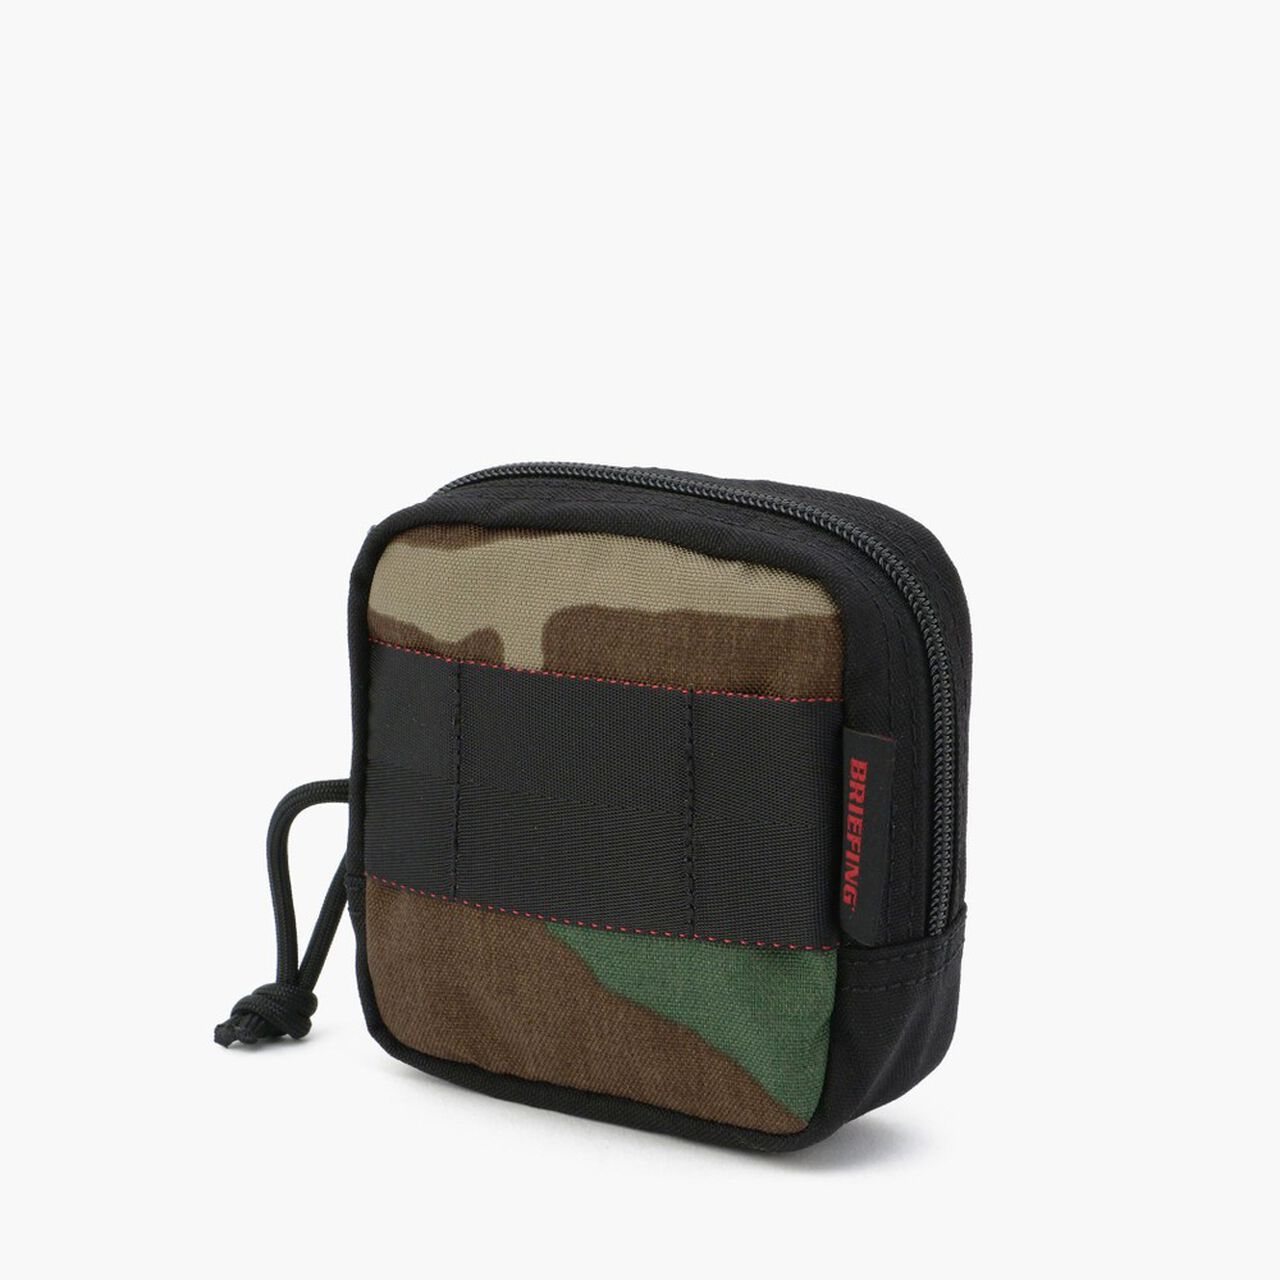 AT-BOX POUCH S CAMO MIX,, large image number 1